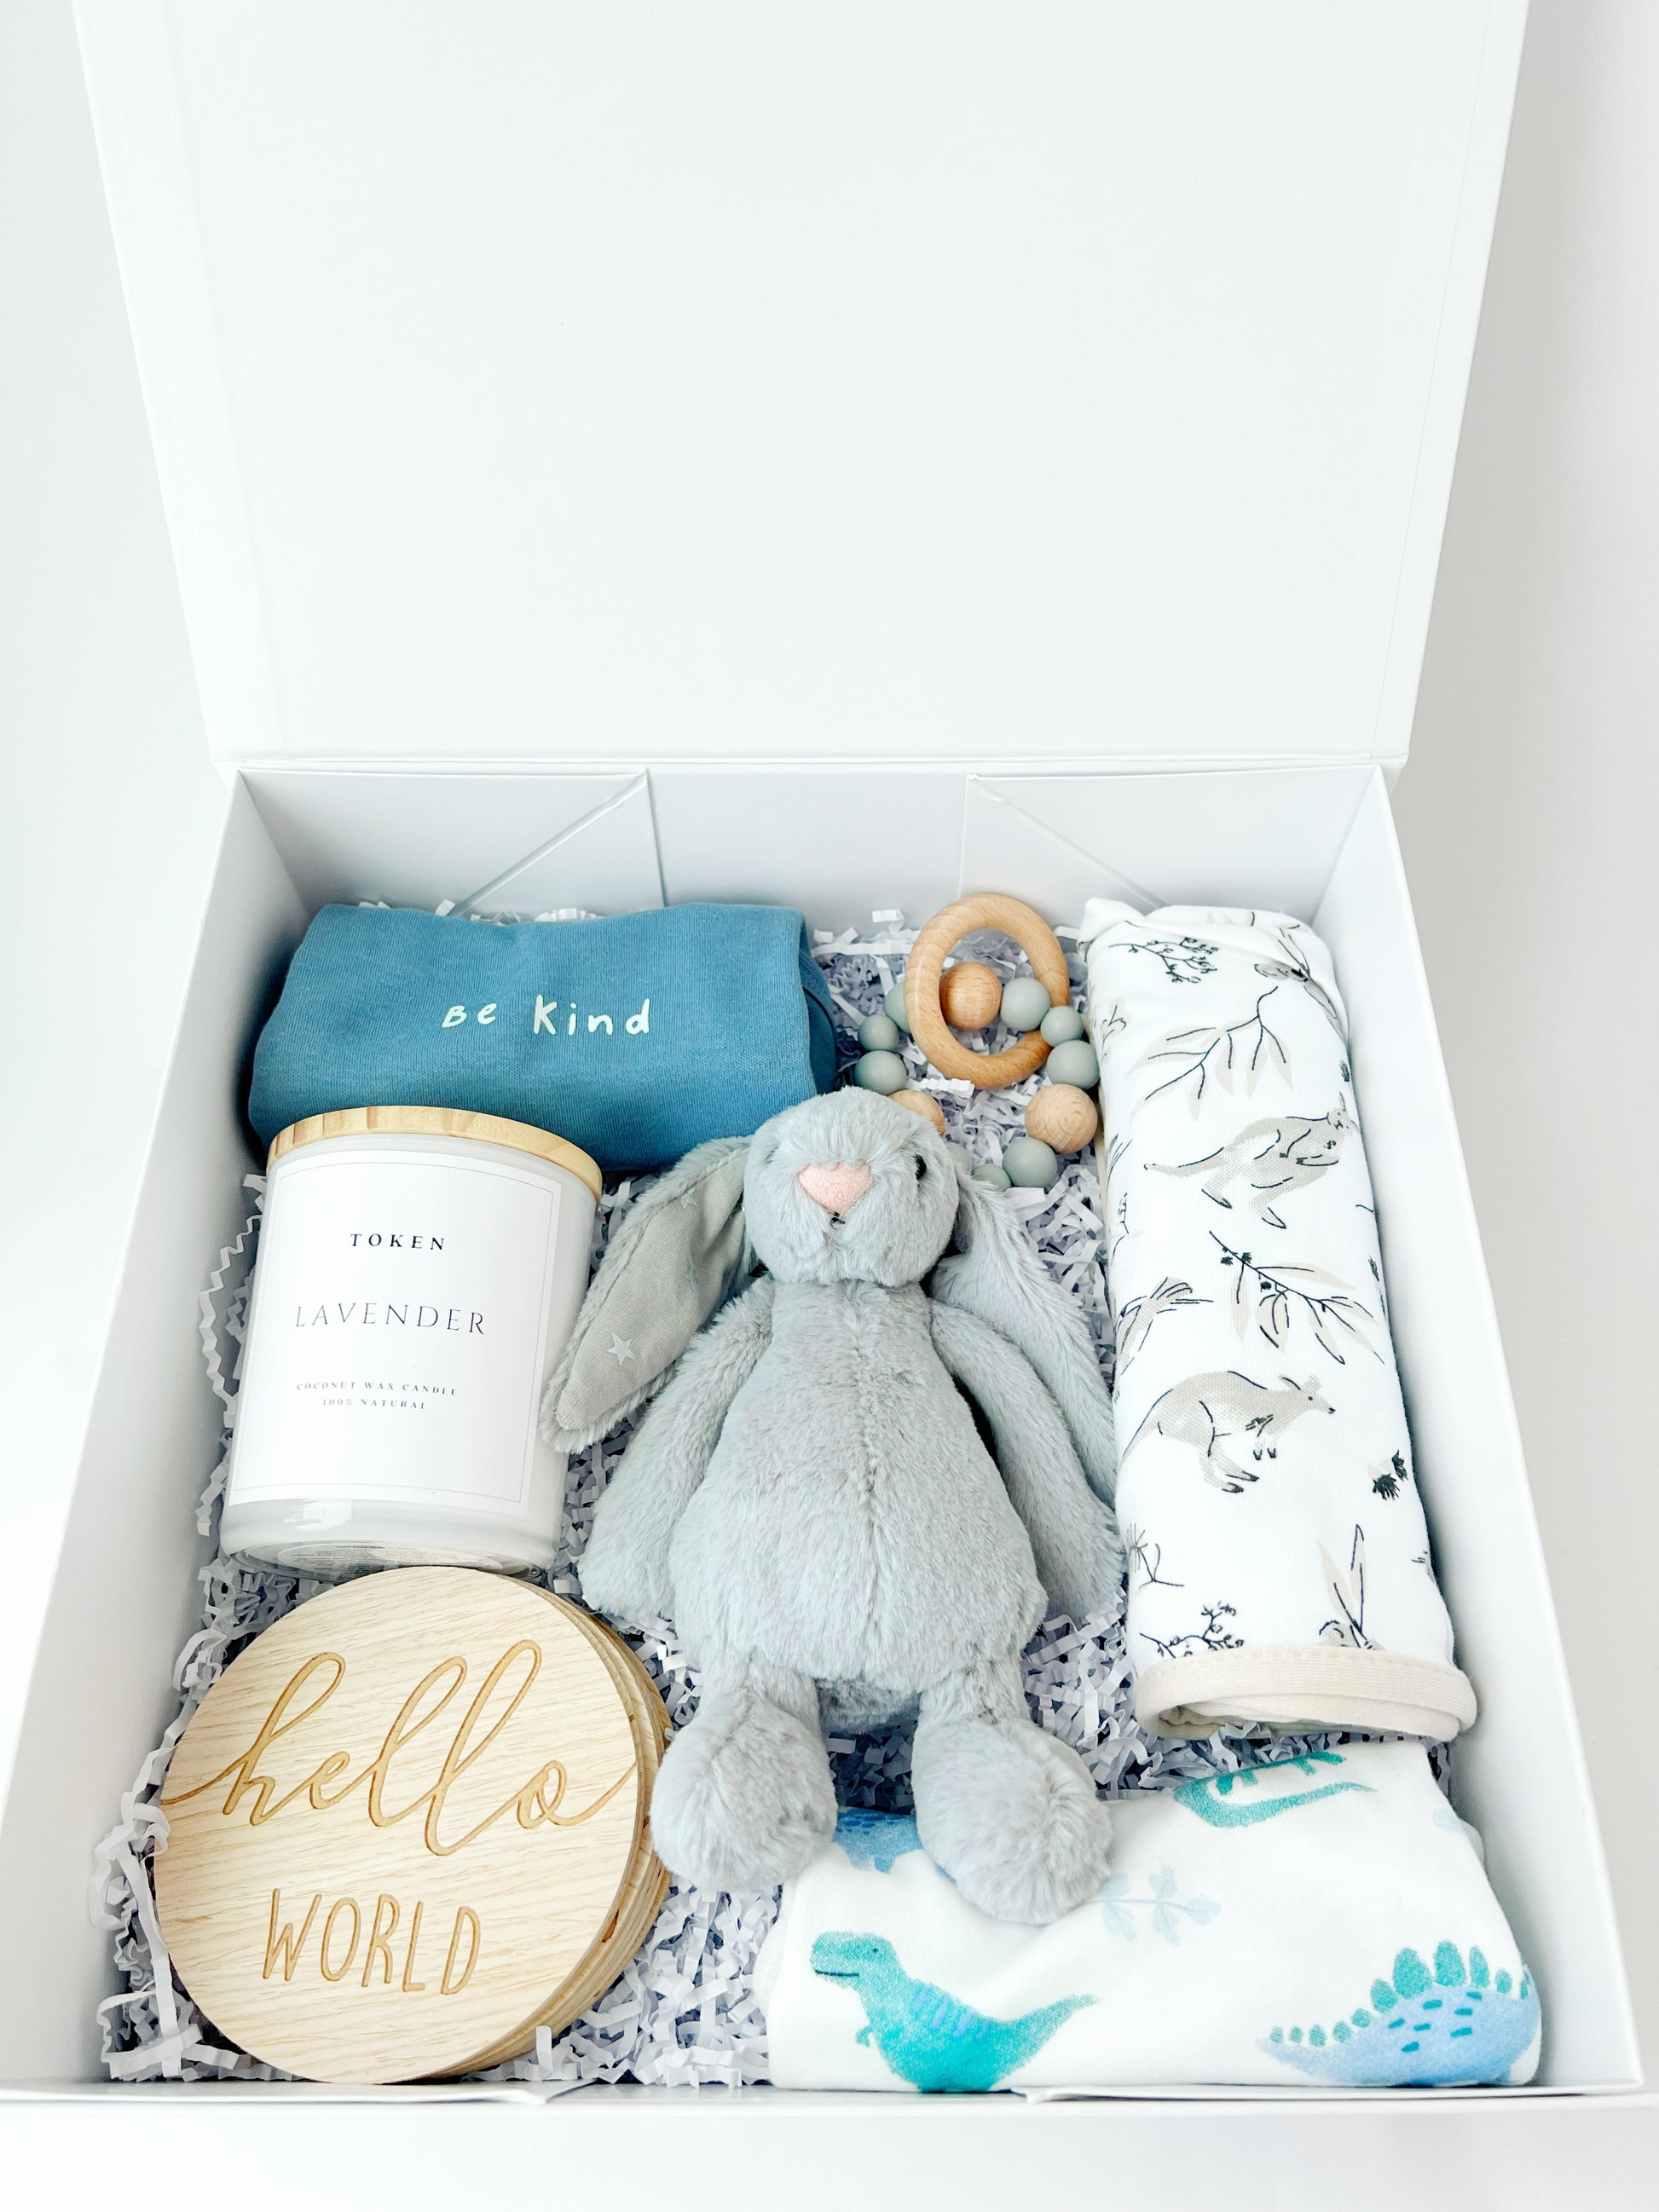 Baby Boy Shower Gift. Includes Jellycat Bunny, Milestone Discs, Rattle, Candle, wrap and onsies.